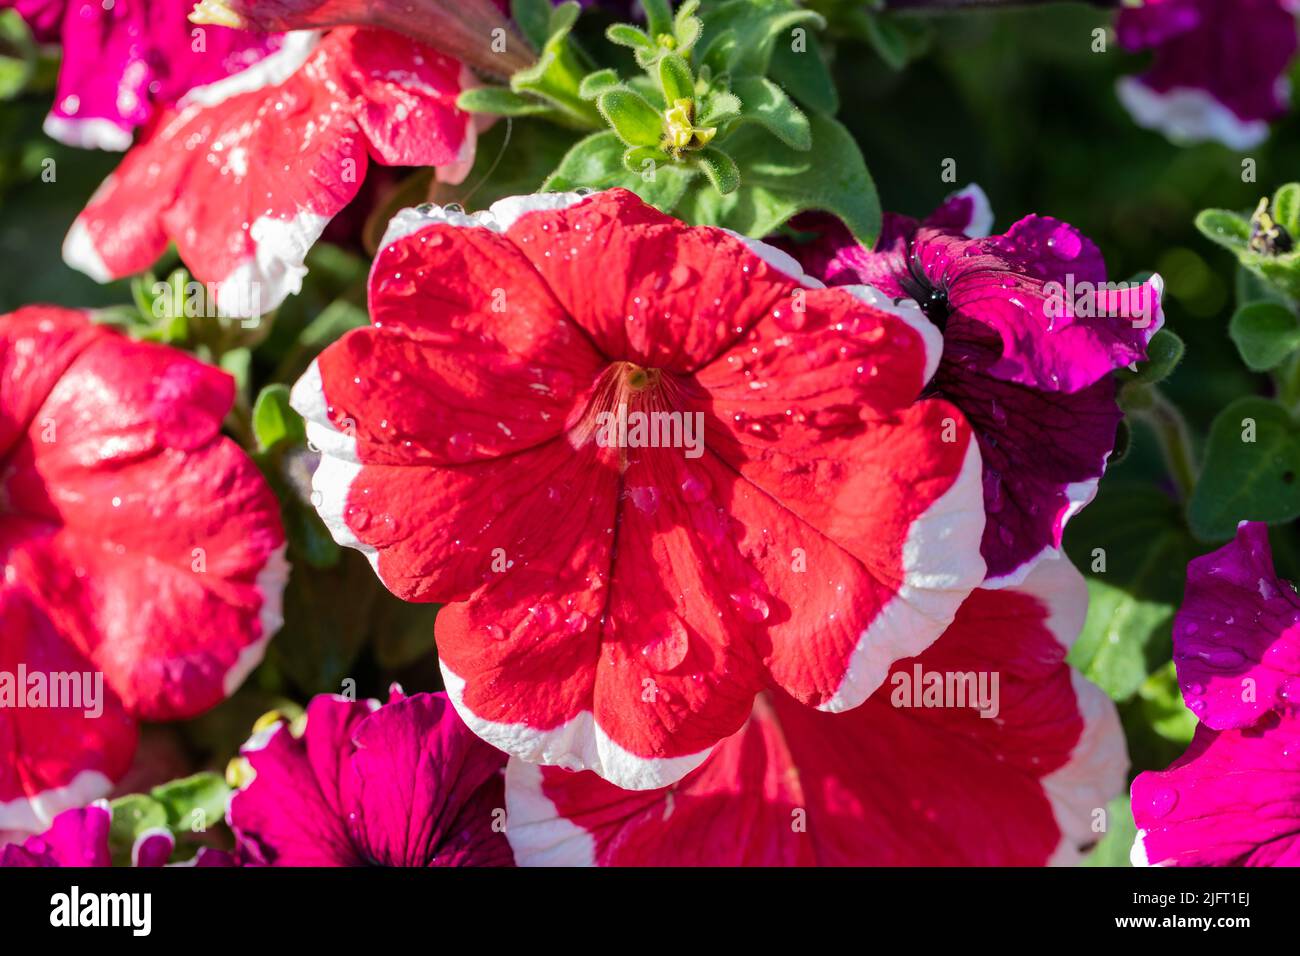 Petunia 'Ice Mix' flowers closeup with water droplets Stock Photo